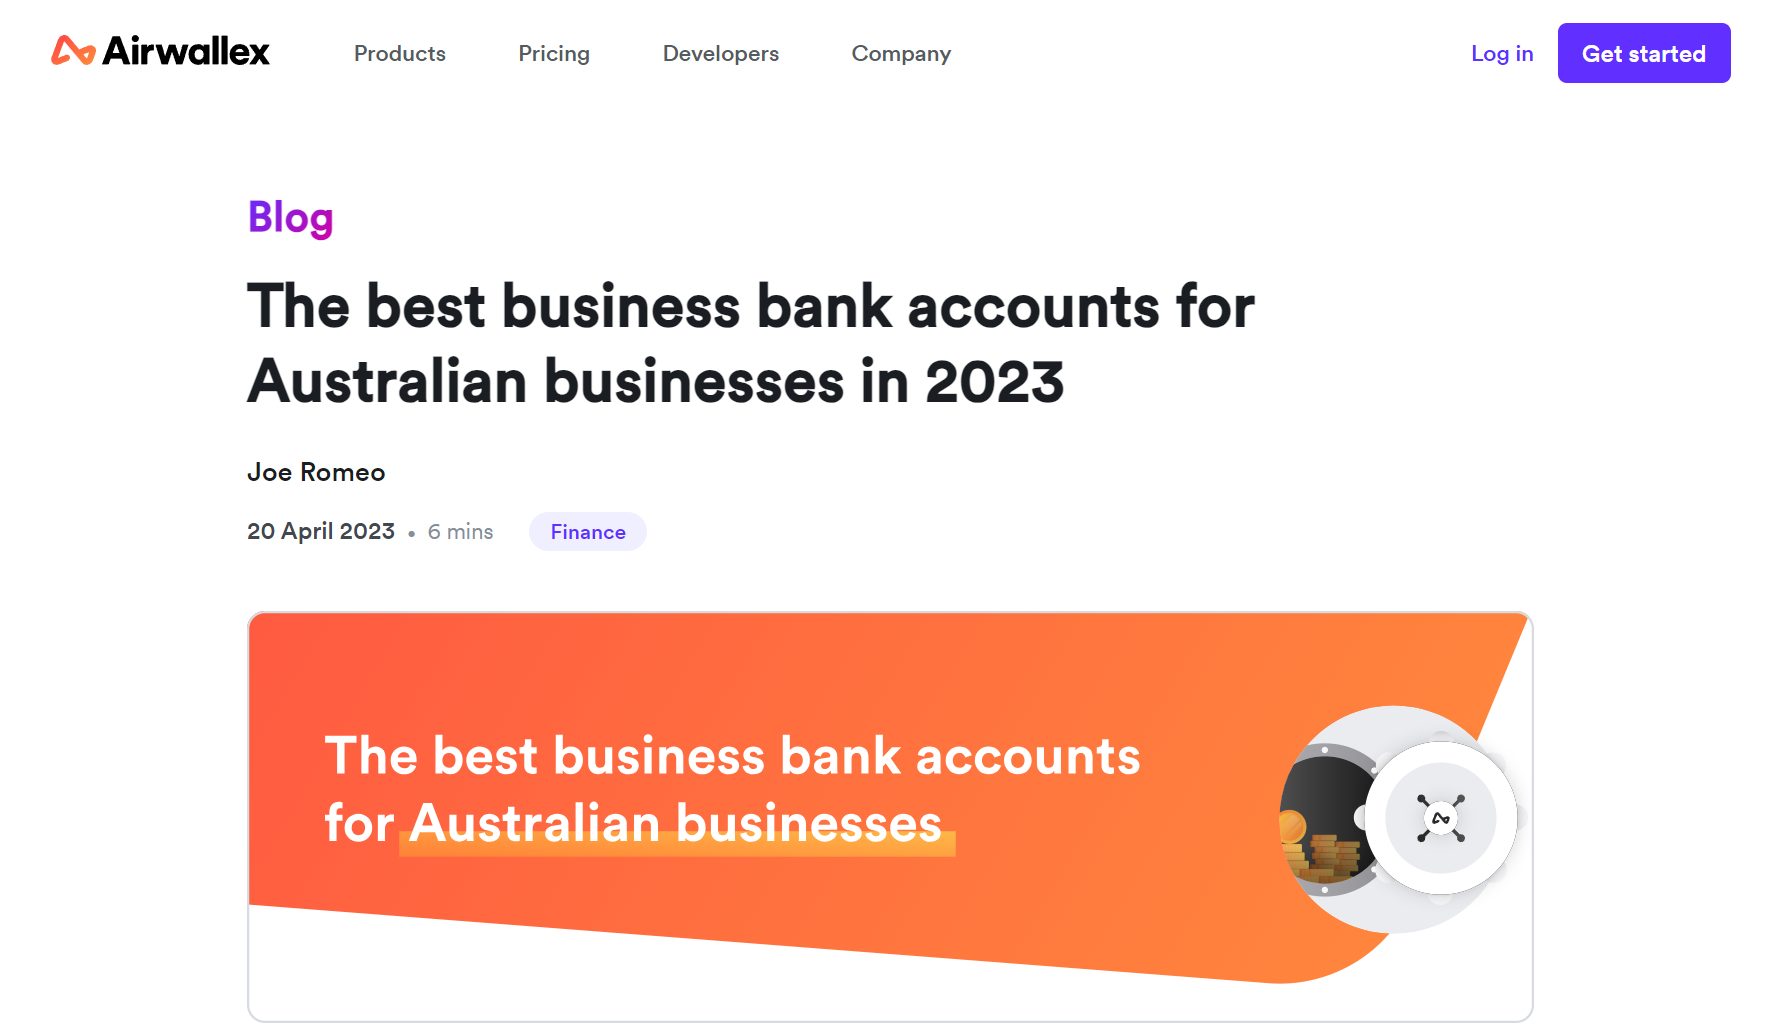 The Airwallex blog post on best business bank accounts in Australia is its top piece in the AU subfolder.